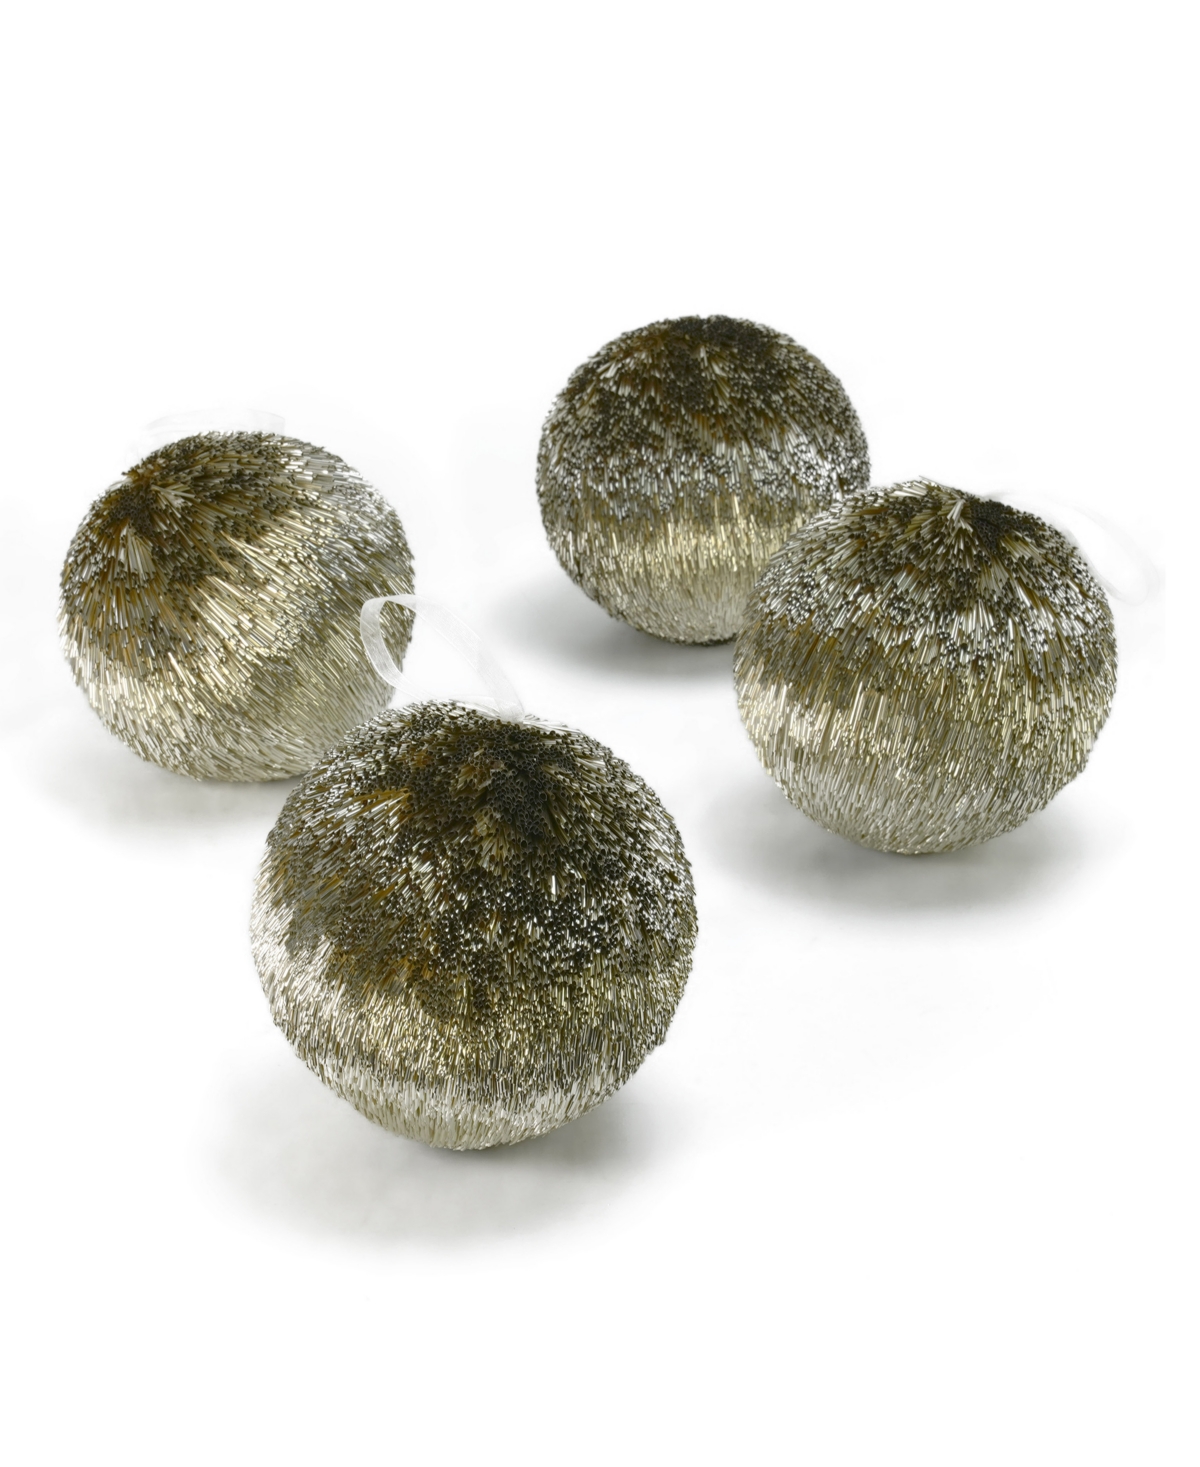 Pipa 5.5" Ornaments, Set of 4 - Champagne